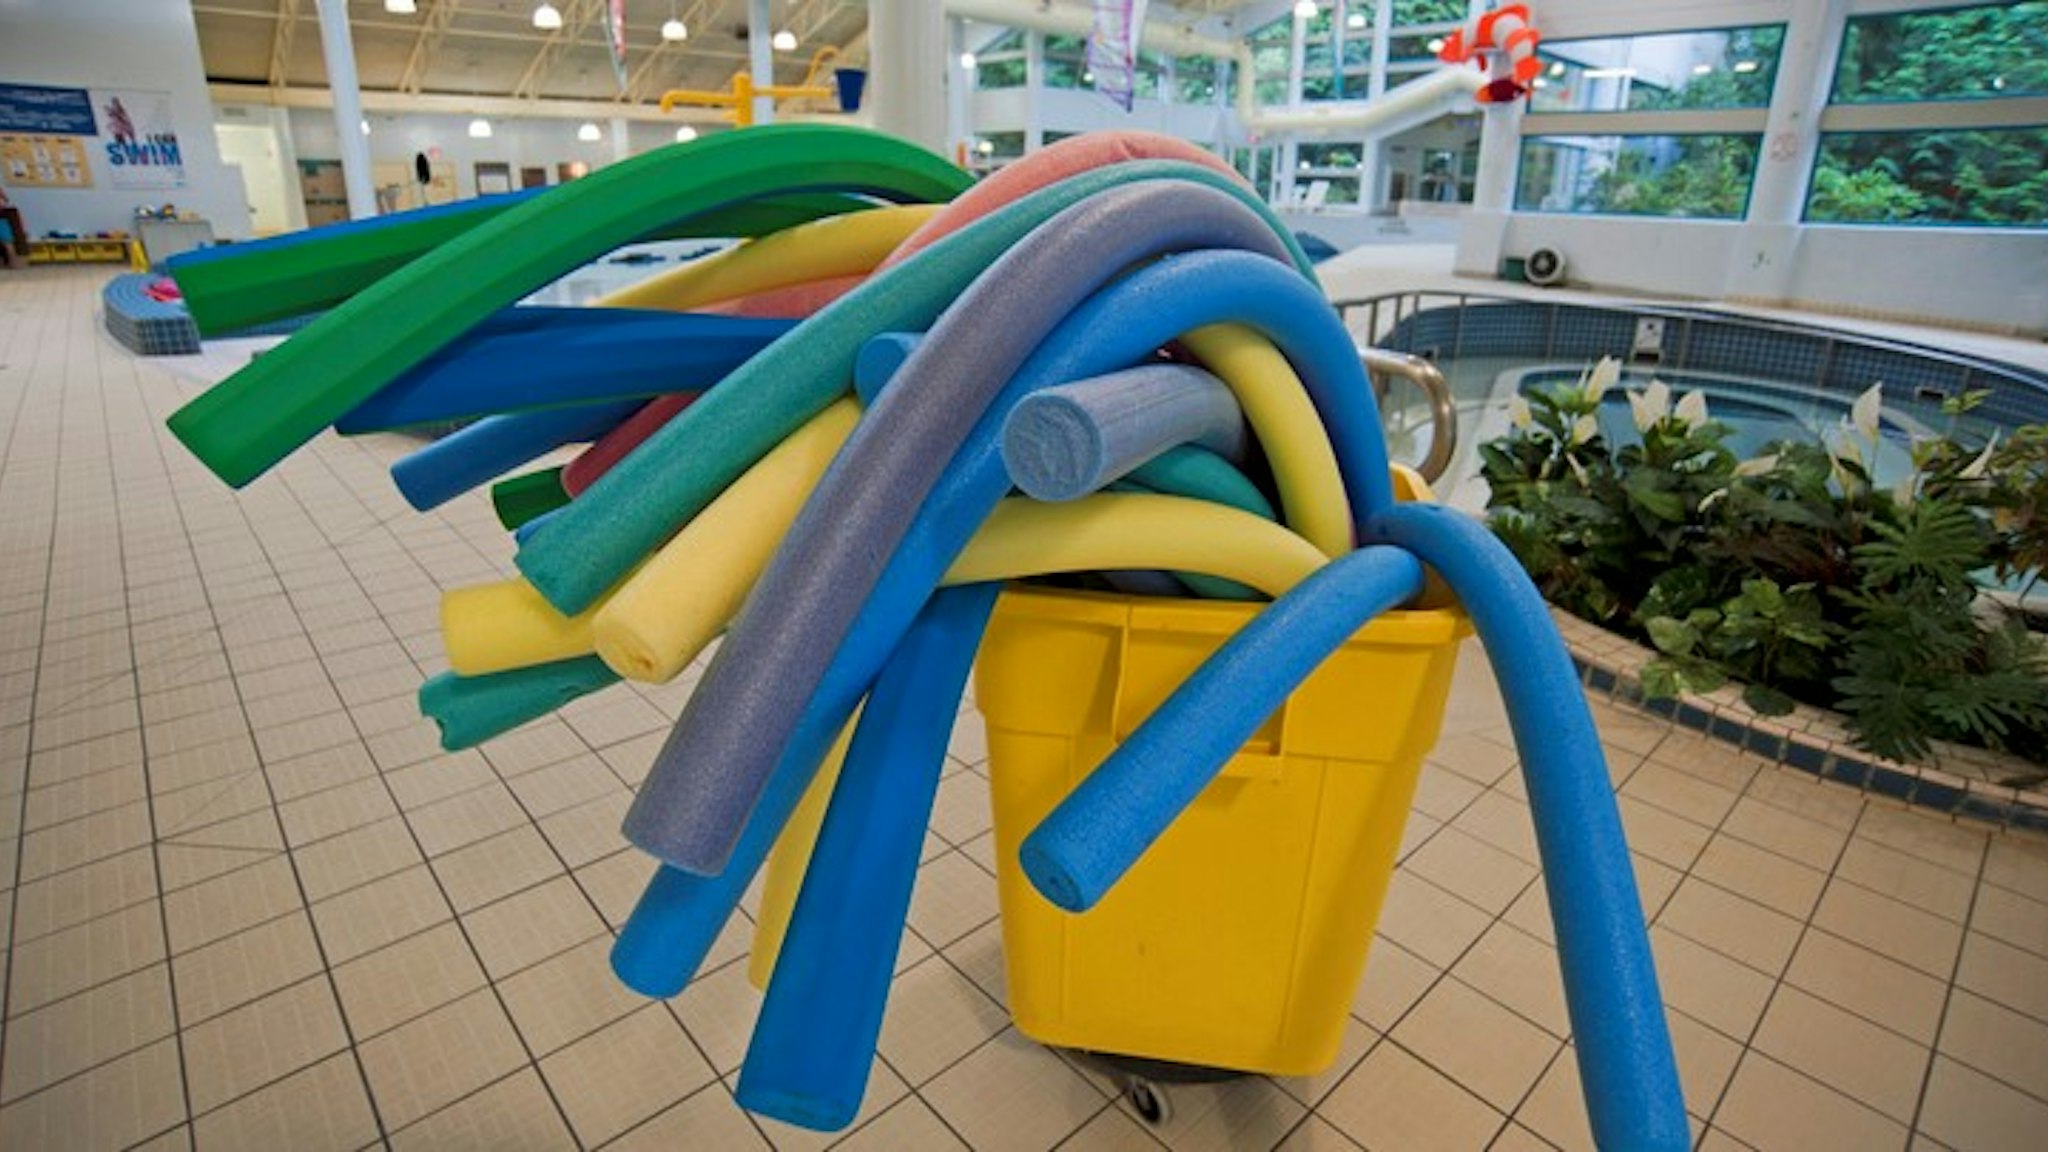 Water Noodles at a Public Swimming Pool